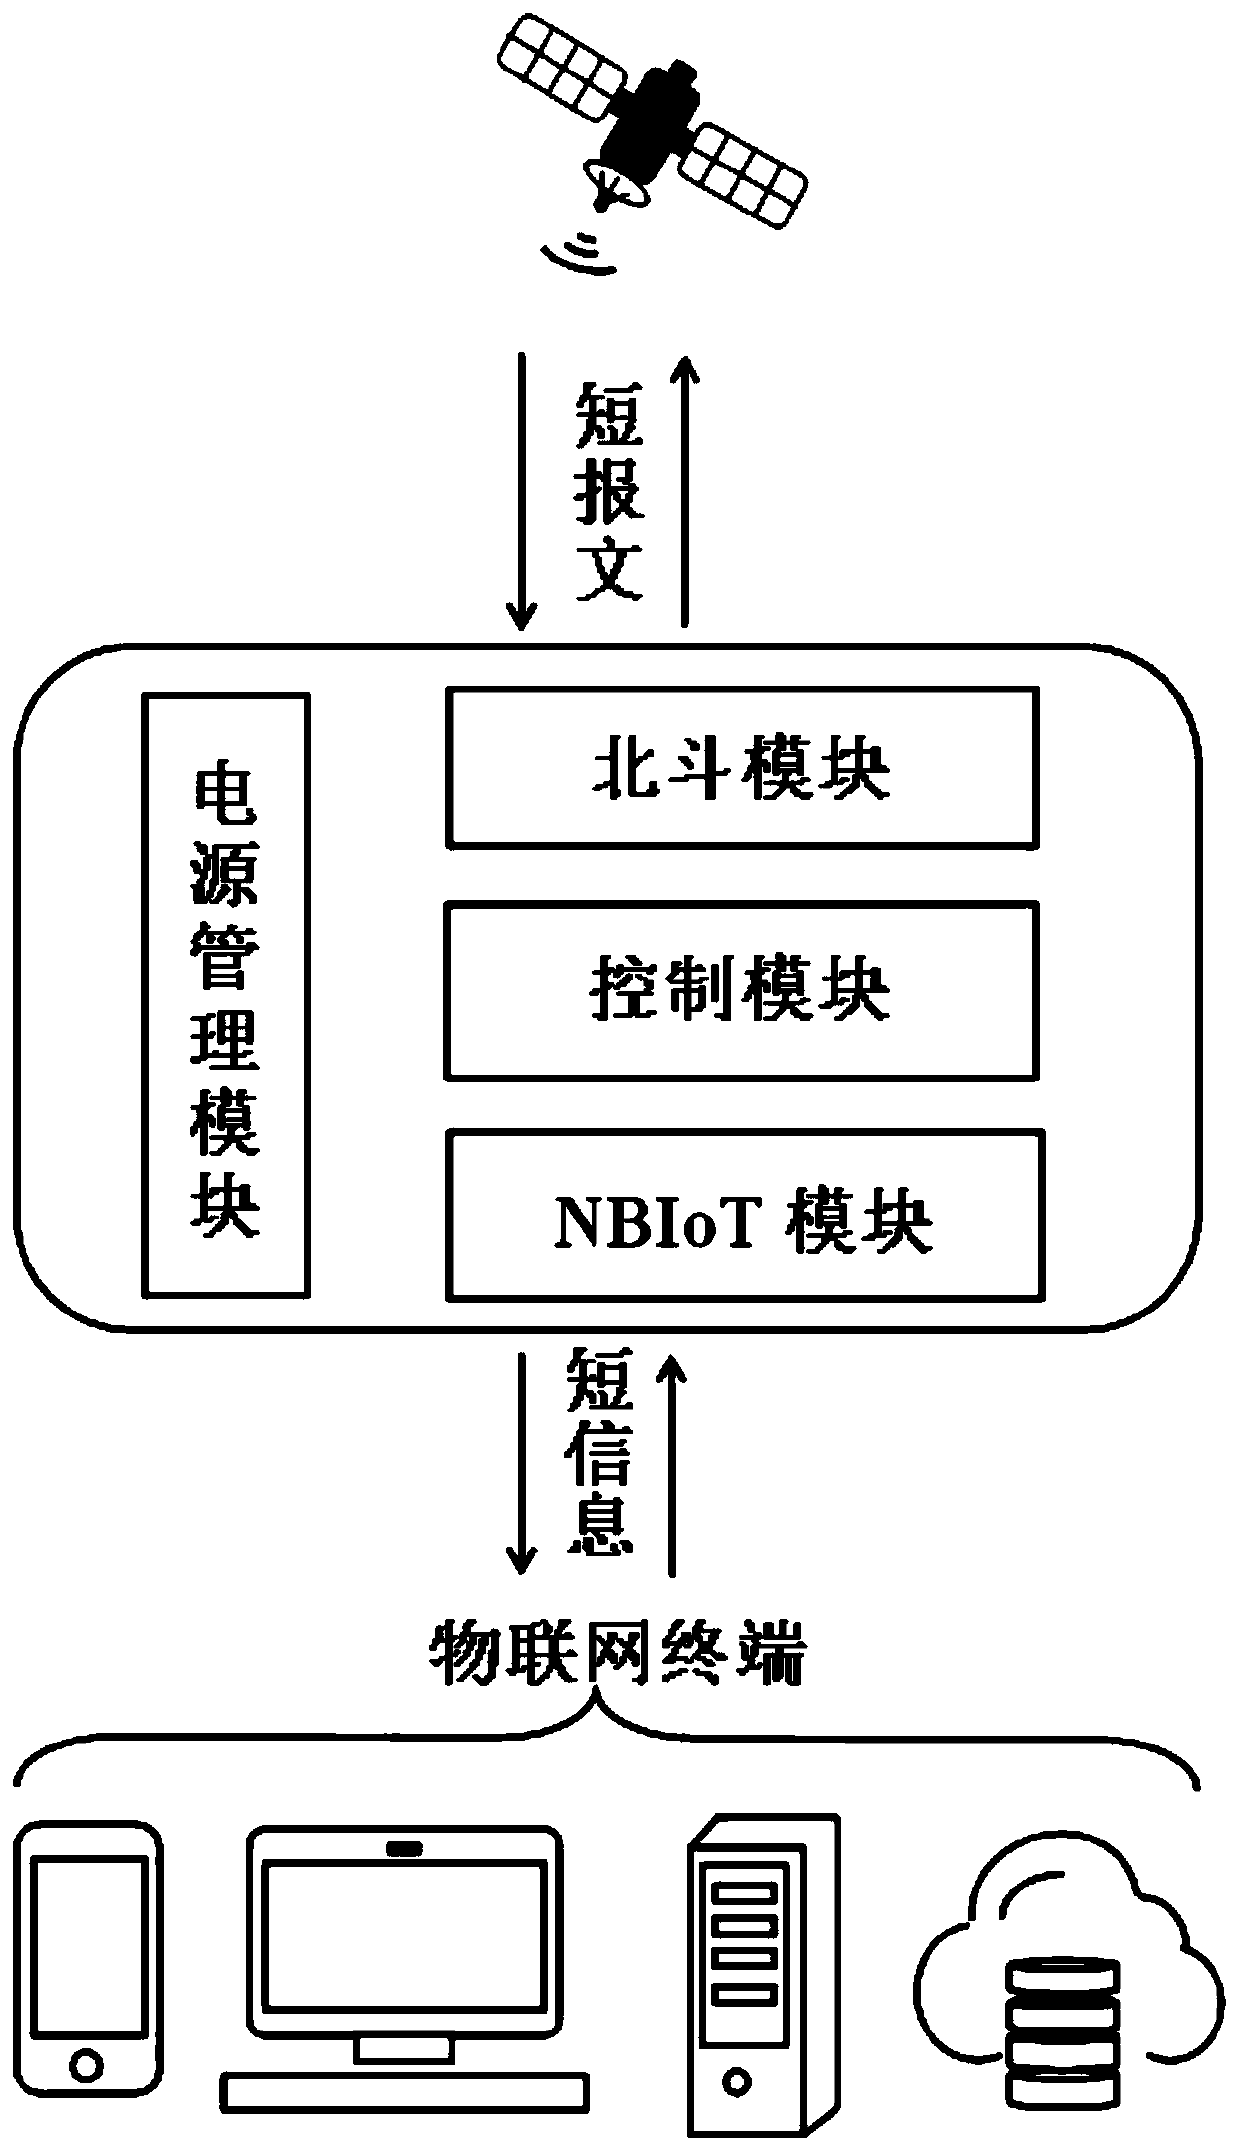 Equipment for information transmission between Beidou terminal and Internet of Things terminal